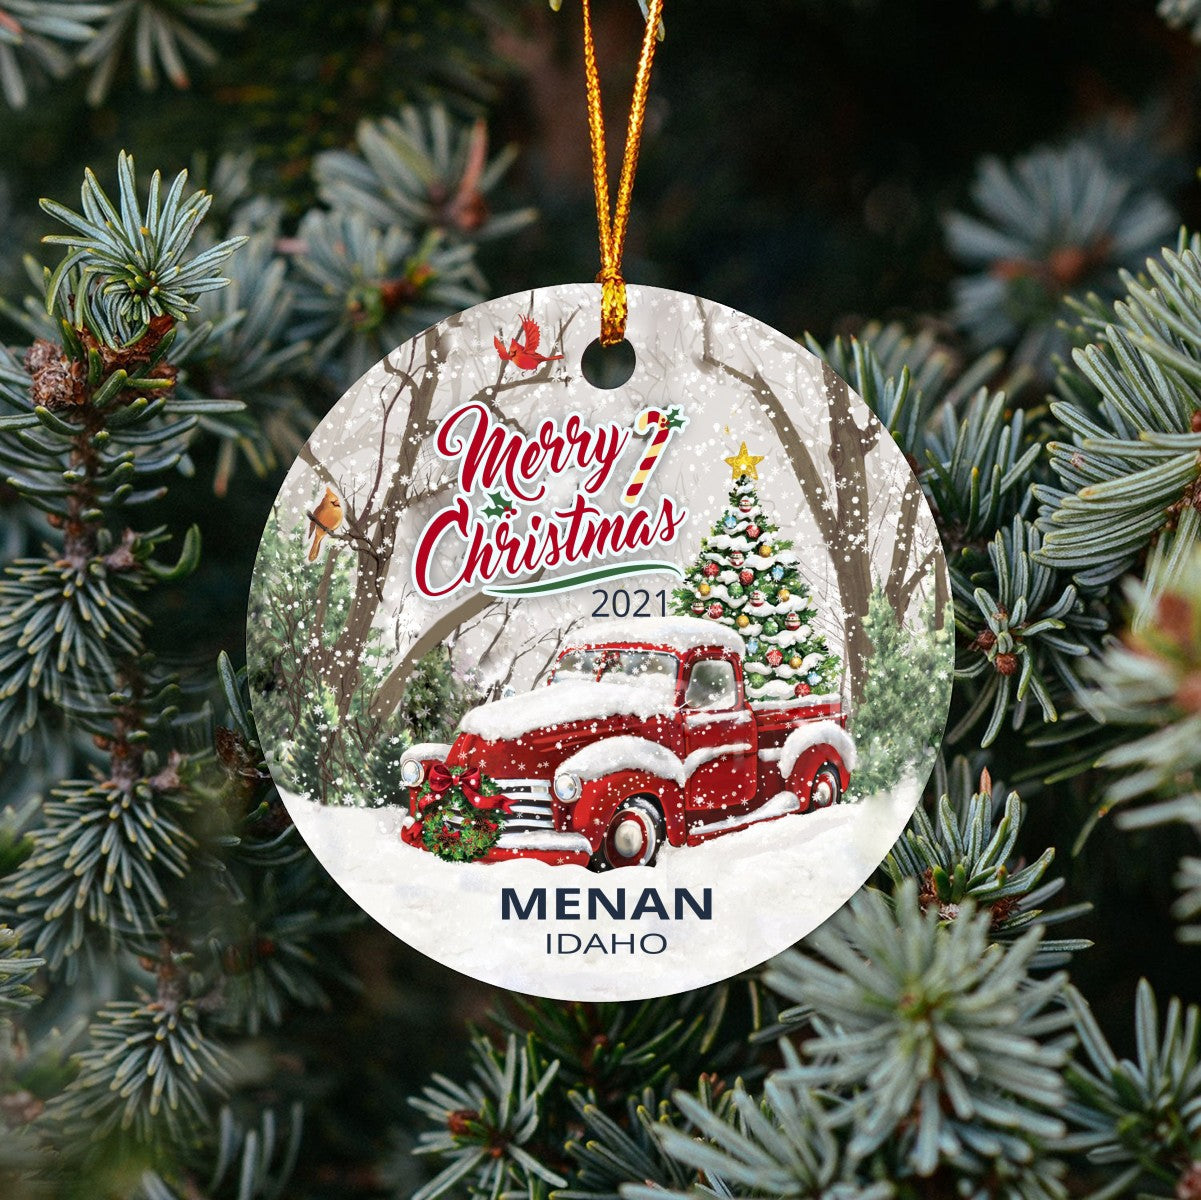 Christmas Tree Ornaments Menan - Ornament With Name City, State Menan Idaho ID Ornament - Red Truck Xmas Ornaments 3'' Plastic Gift For Family, Friend And Housewarming